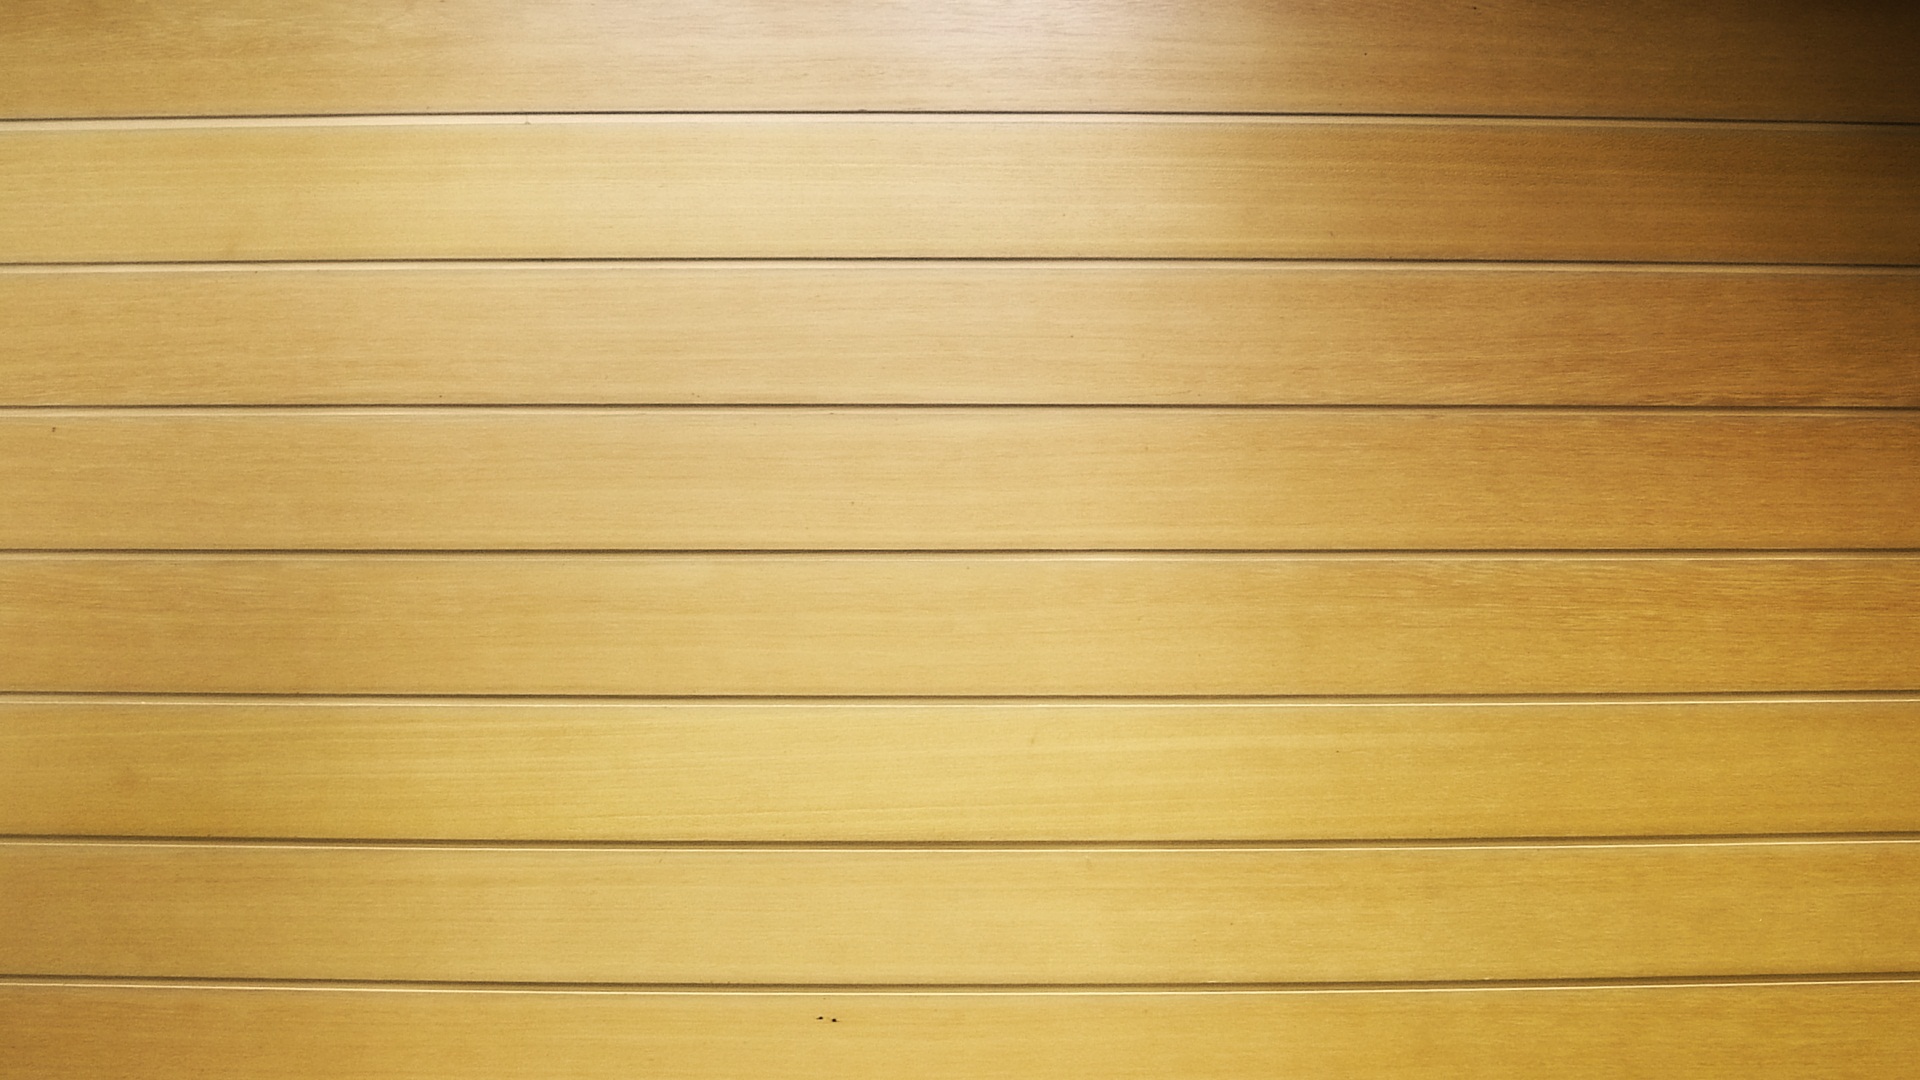 35 Hd Wood Wallpapers Backgrounds For Free Download Images, Photos, Reviews